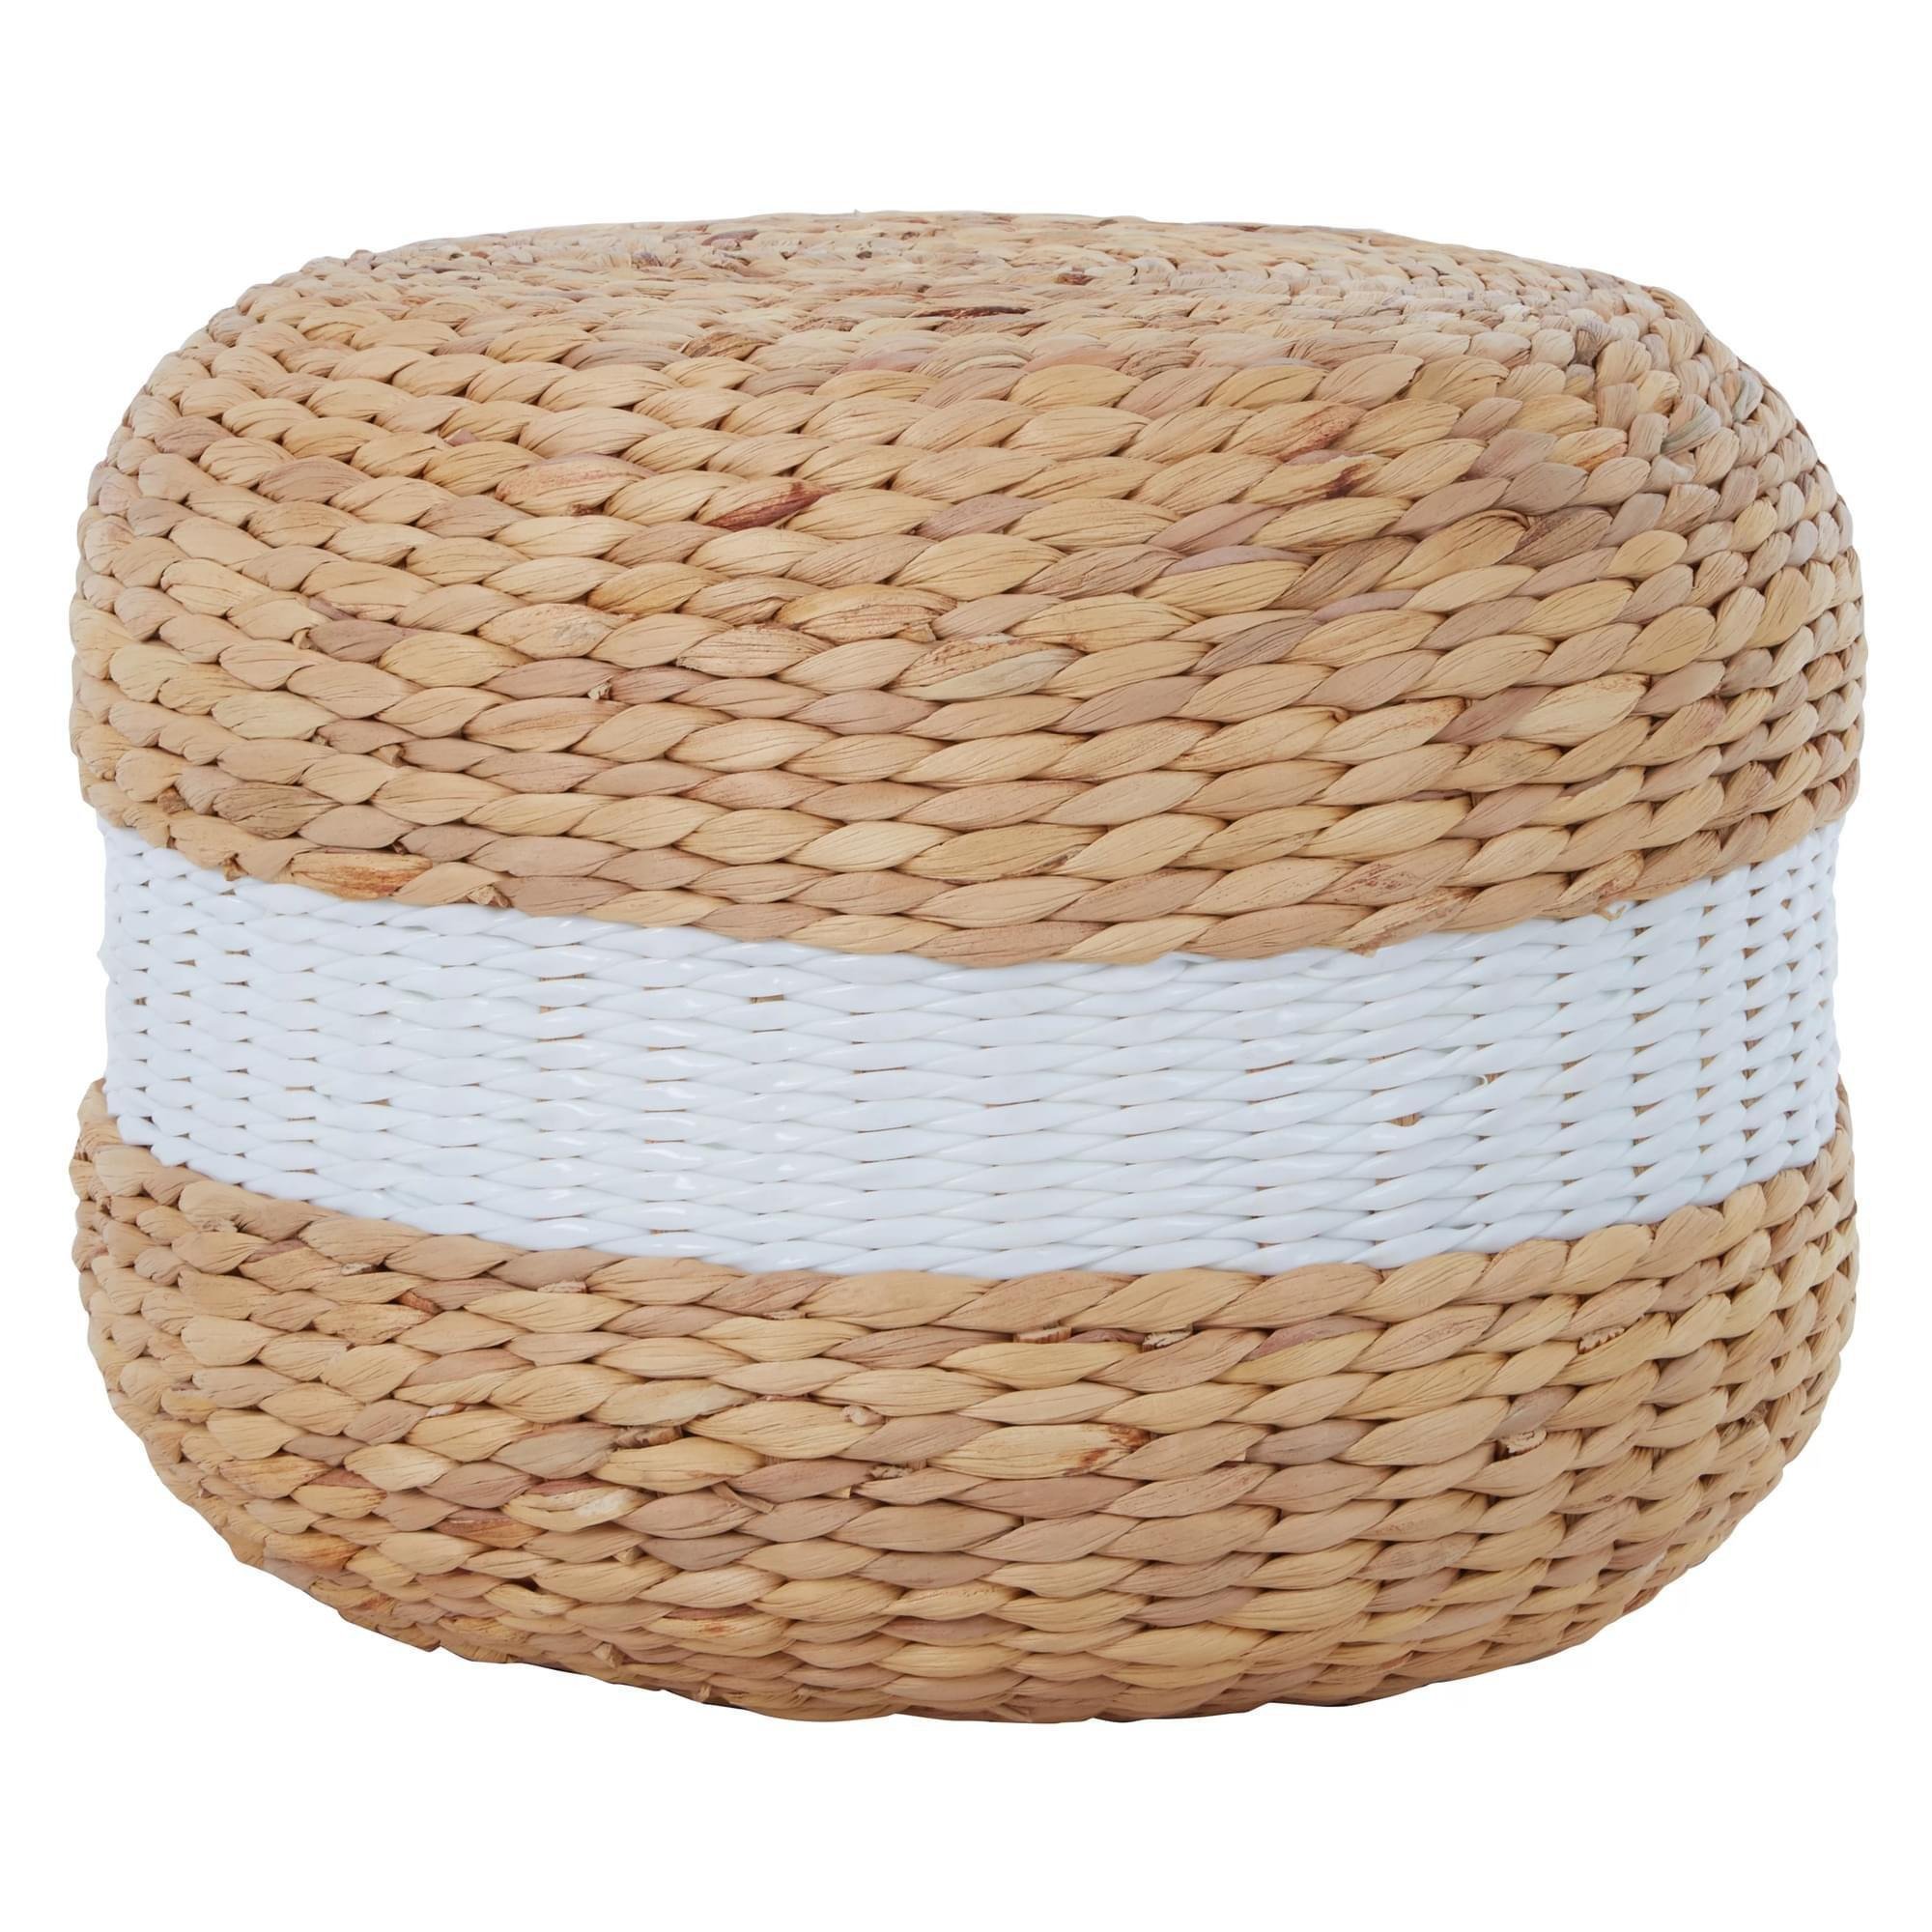 Interiors by Premier White Stripe Seagrass Pouffe, Comfortable footrest seagrass pouffe,Easy to move woven stool, Versatile stool - image 1